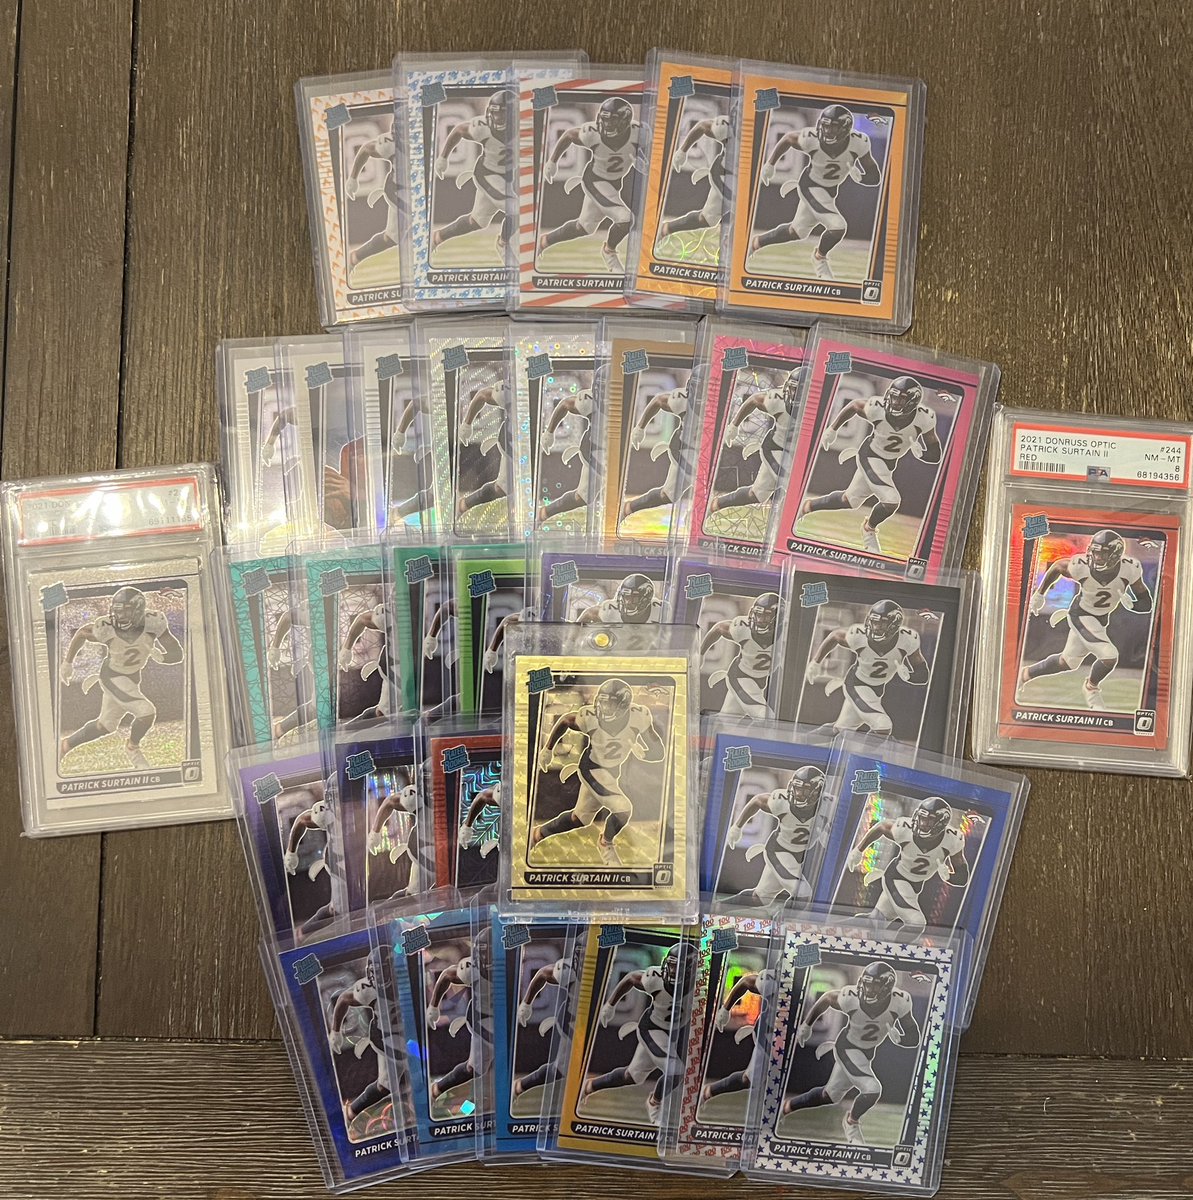 I felt like a kid on Christmas morning when I got the mail today! My PS2 optical rated rookie rainbow is now 100% on the retail and hobby checklists!  Rainbow collecting nowadays is a grind because of all the parallels but the chase keeps the hobby fun! #thehobby #ratedrookie